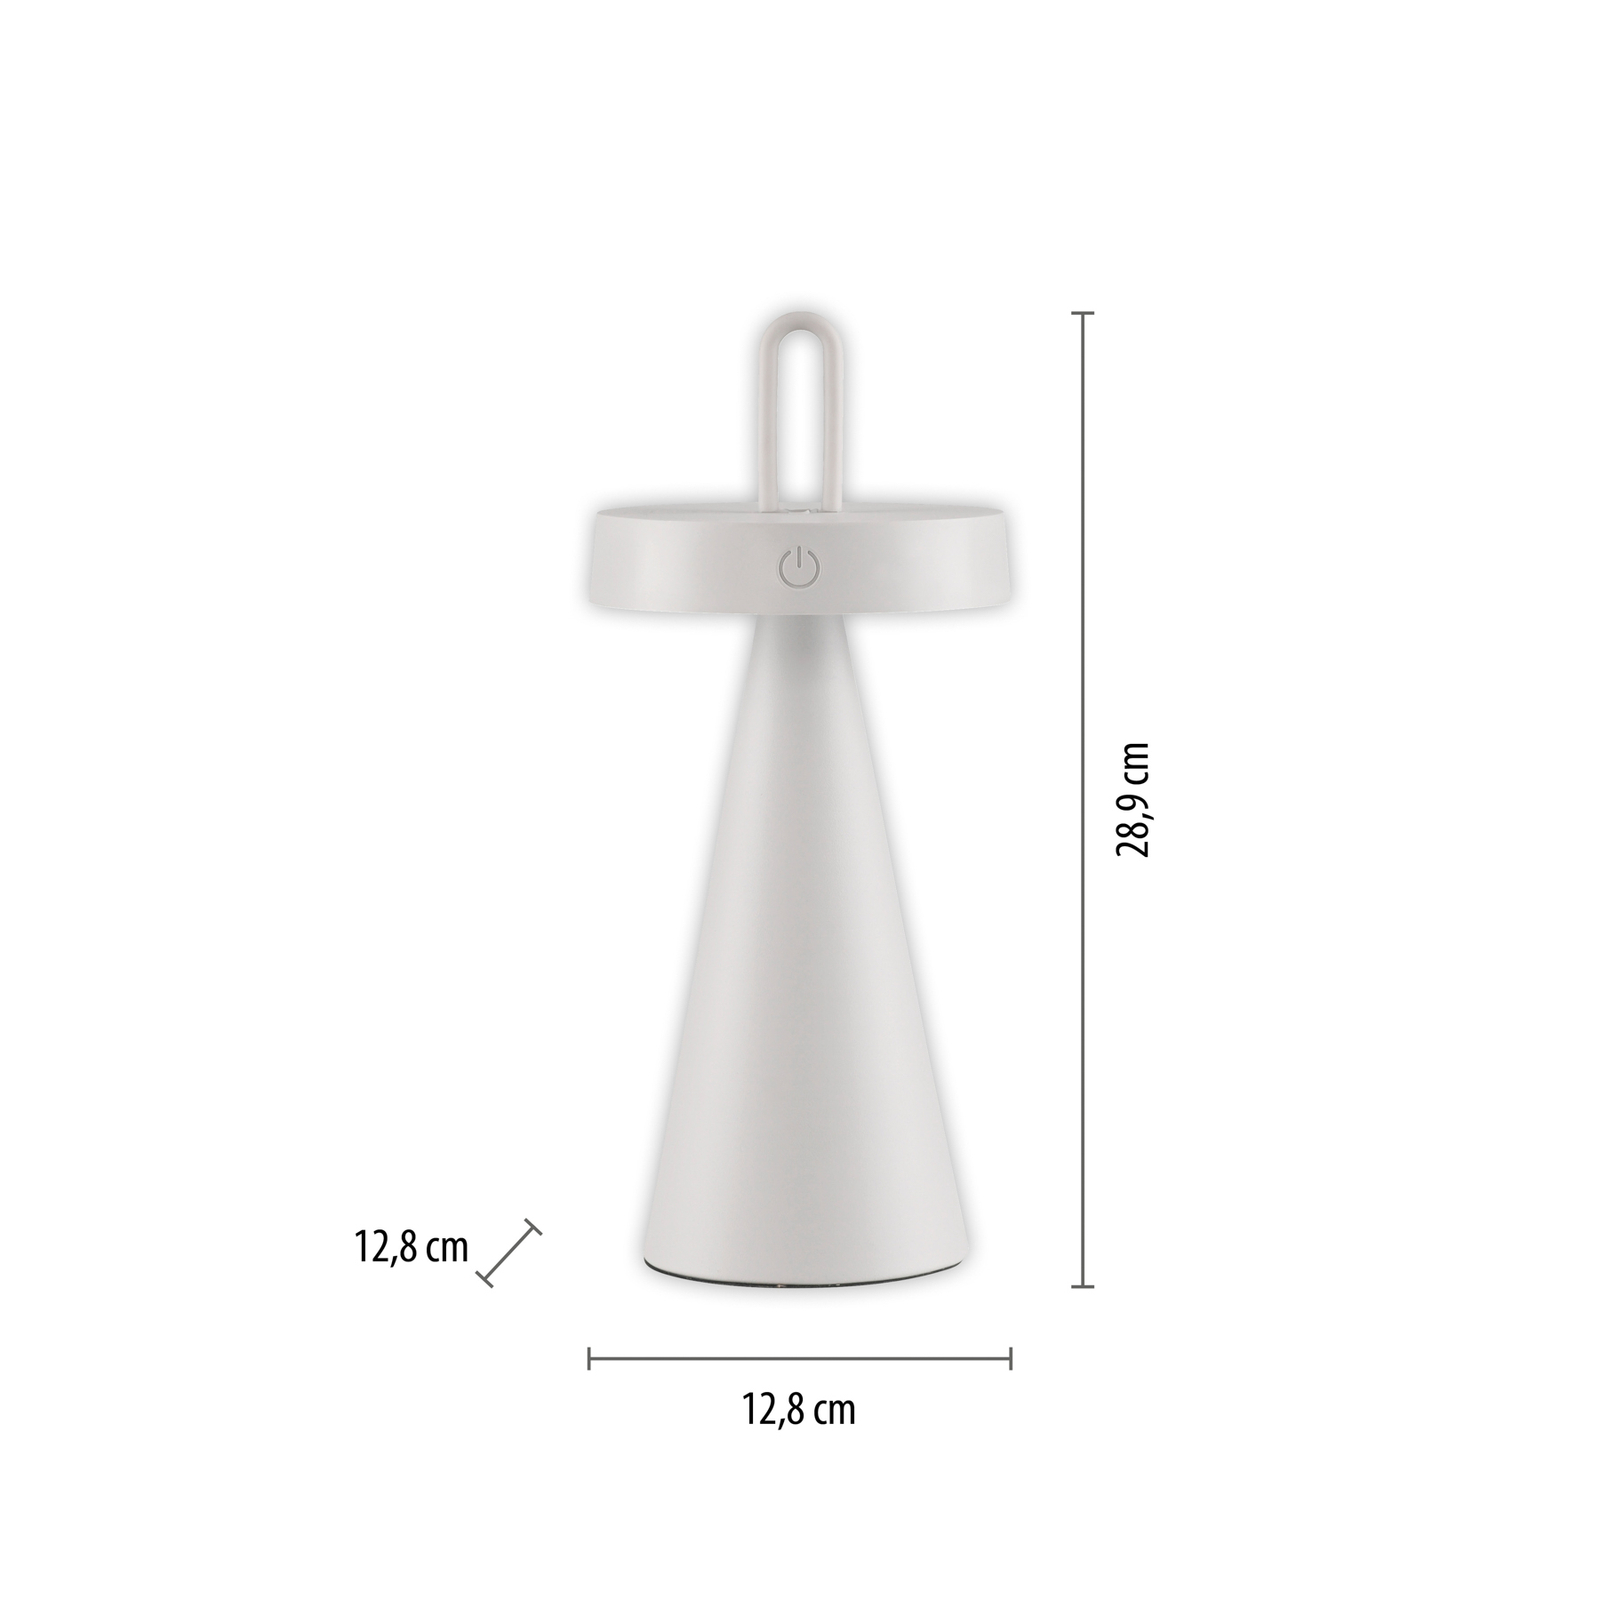 JUST LIGHT. Lampe de table LED rechargeable Alwa, blanc, fer, IP44